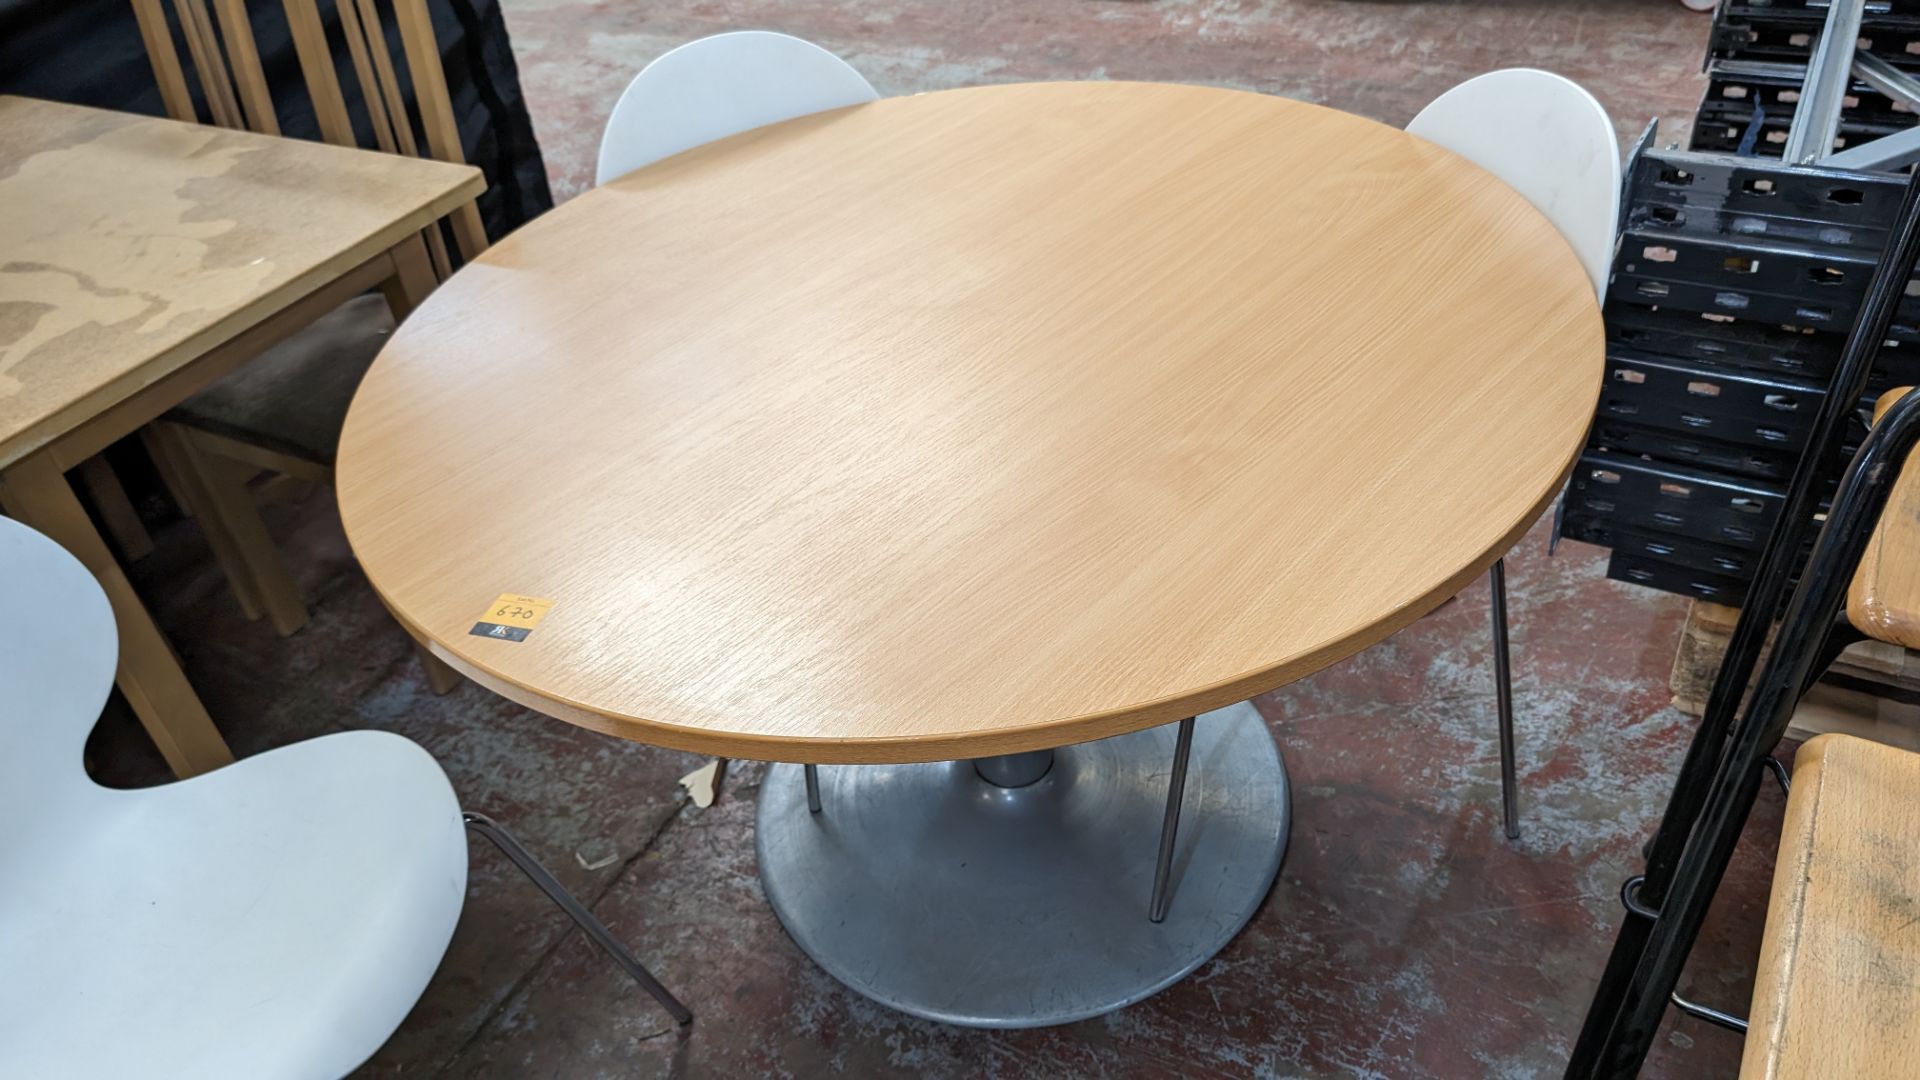 Round single pedestal table, approximately 1,200mm diameter